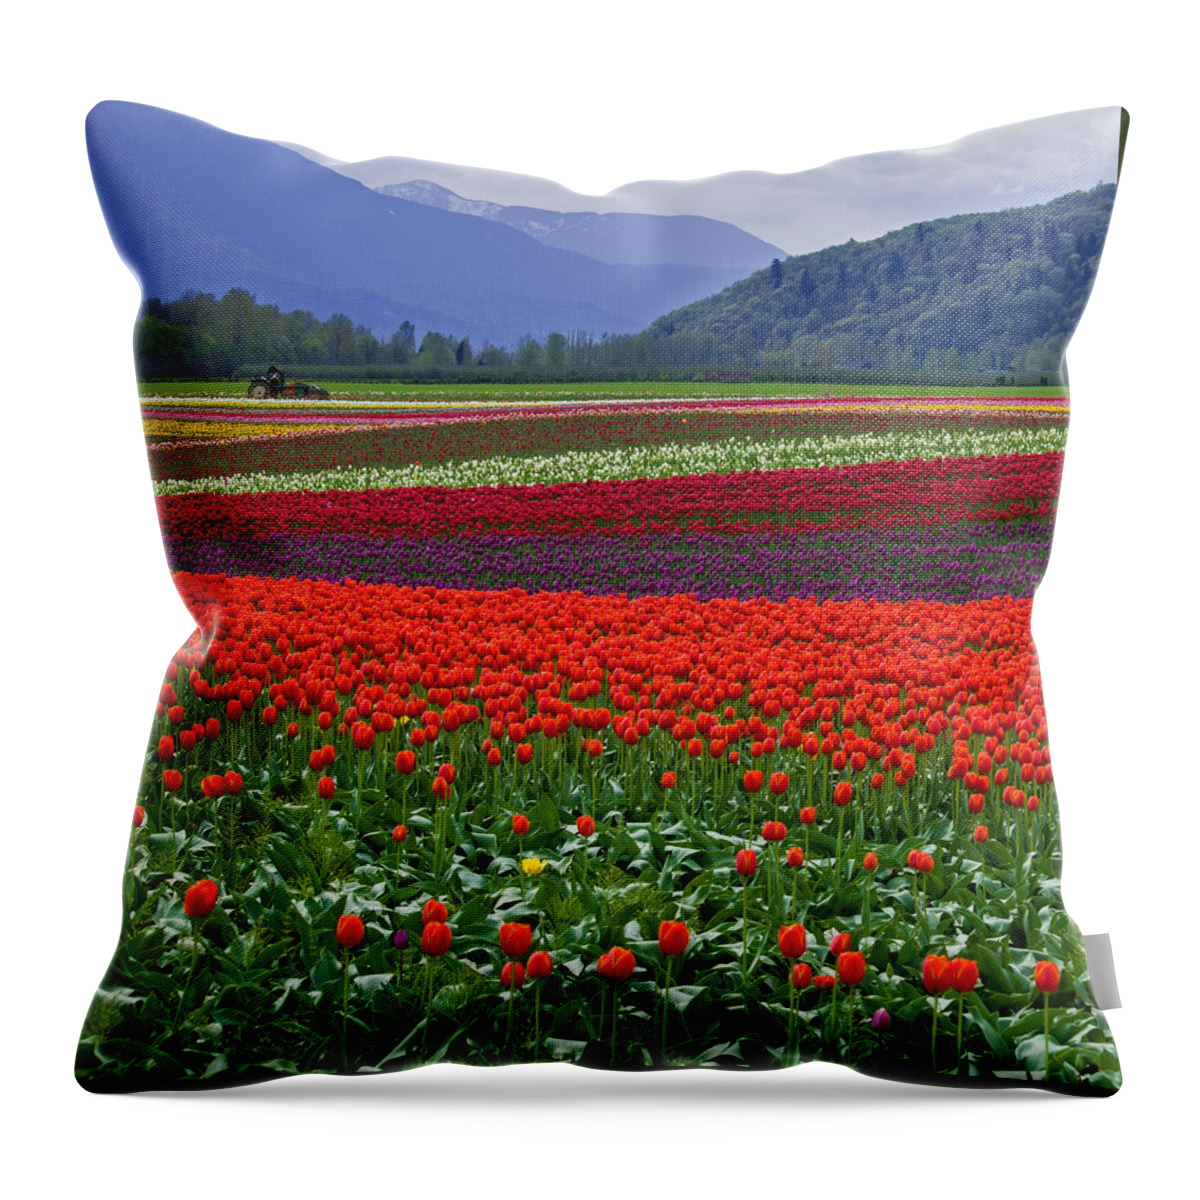 Field Of Tulips Throw Pillow featuring the photograph Field of Tulips by Jordan Blackstone